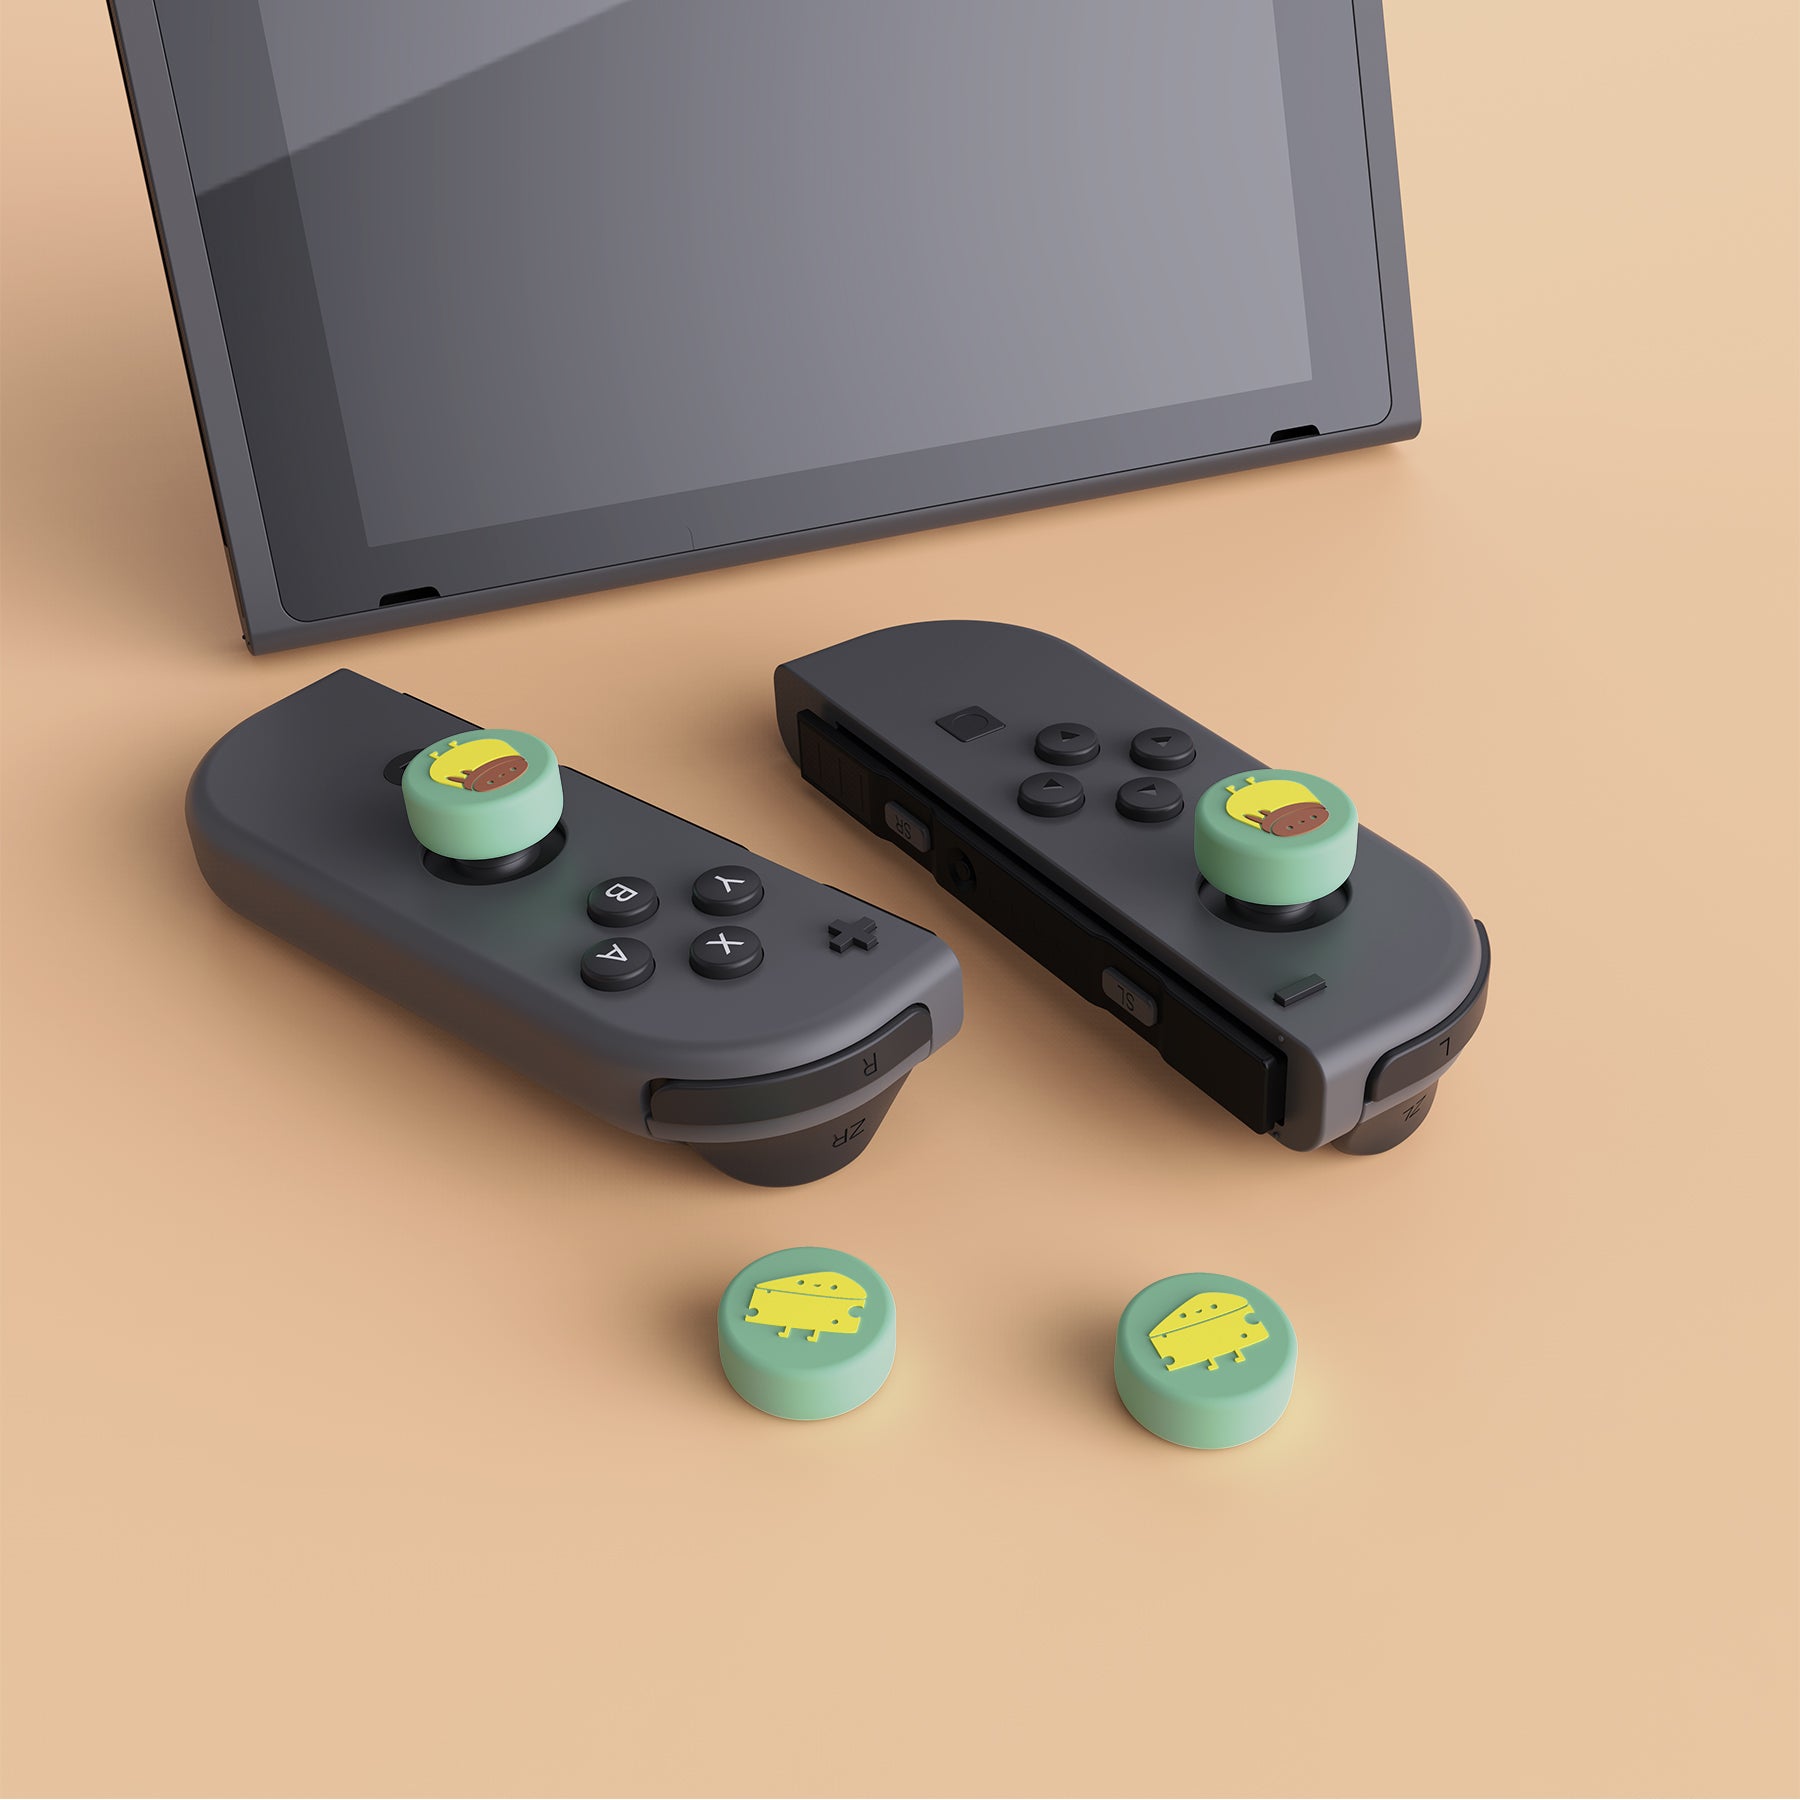 PlayVital Cheese & Pudding Cute Switch Thumb Grip Caps, Joystick Caps for Nintendo Switch Lite, Silicone Analog Cover Thumbstick Grips for Switch OLED Joycon - Seafoam Green - NJM1097 playvital